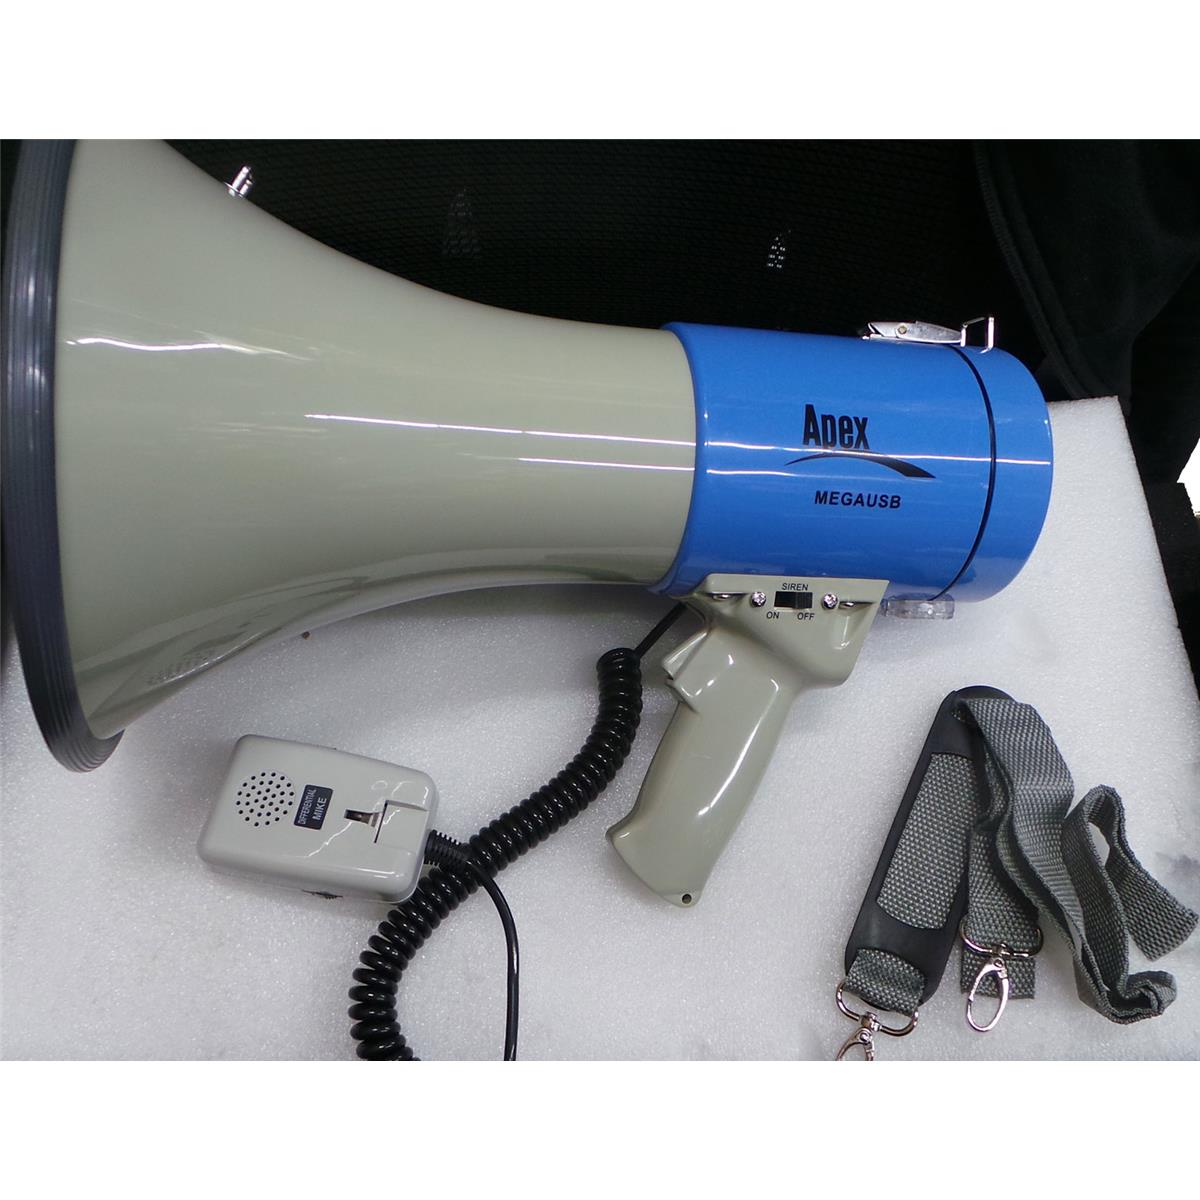 Image of Apex MegaUSB Round Horn Megaphone with Siren and Walkie-Talkie